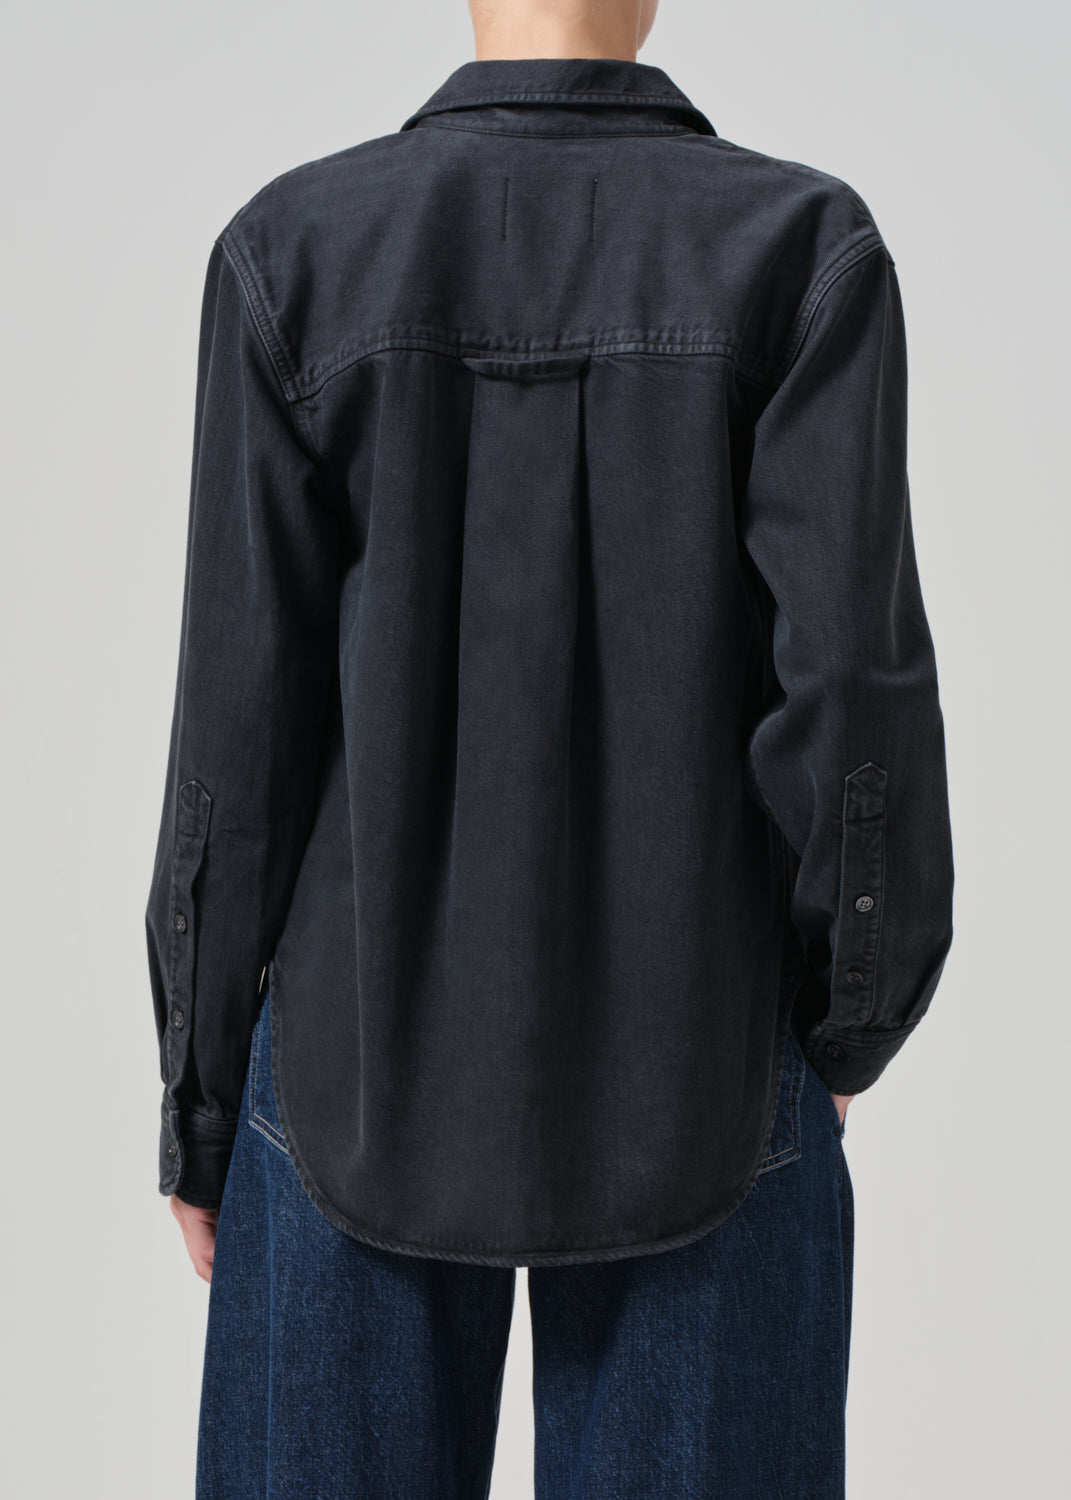 Baby Shay Shirt in Washed Black back